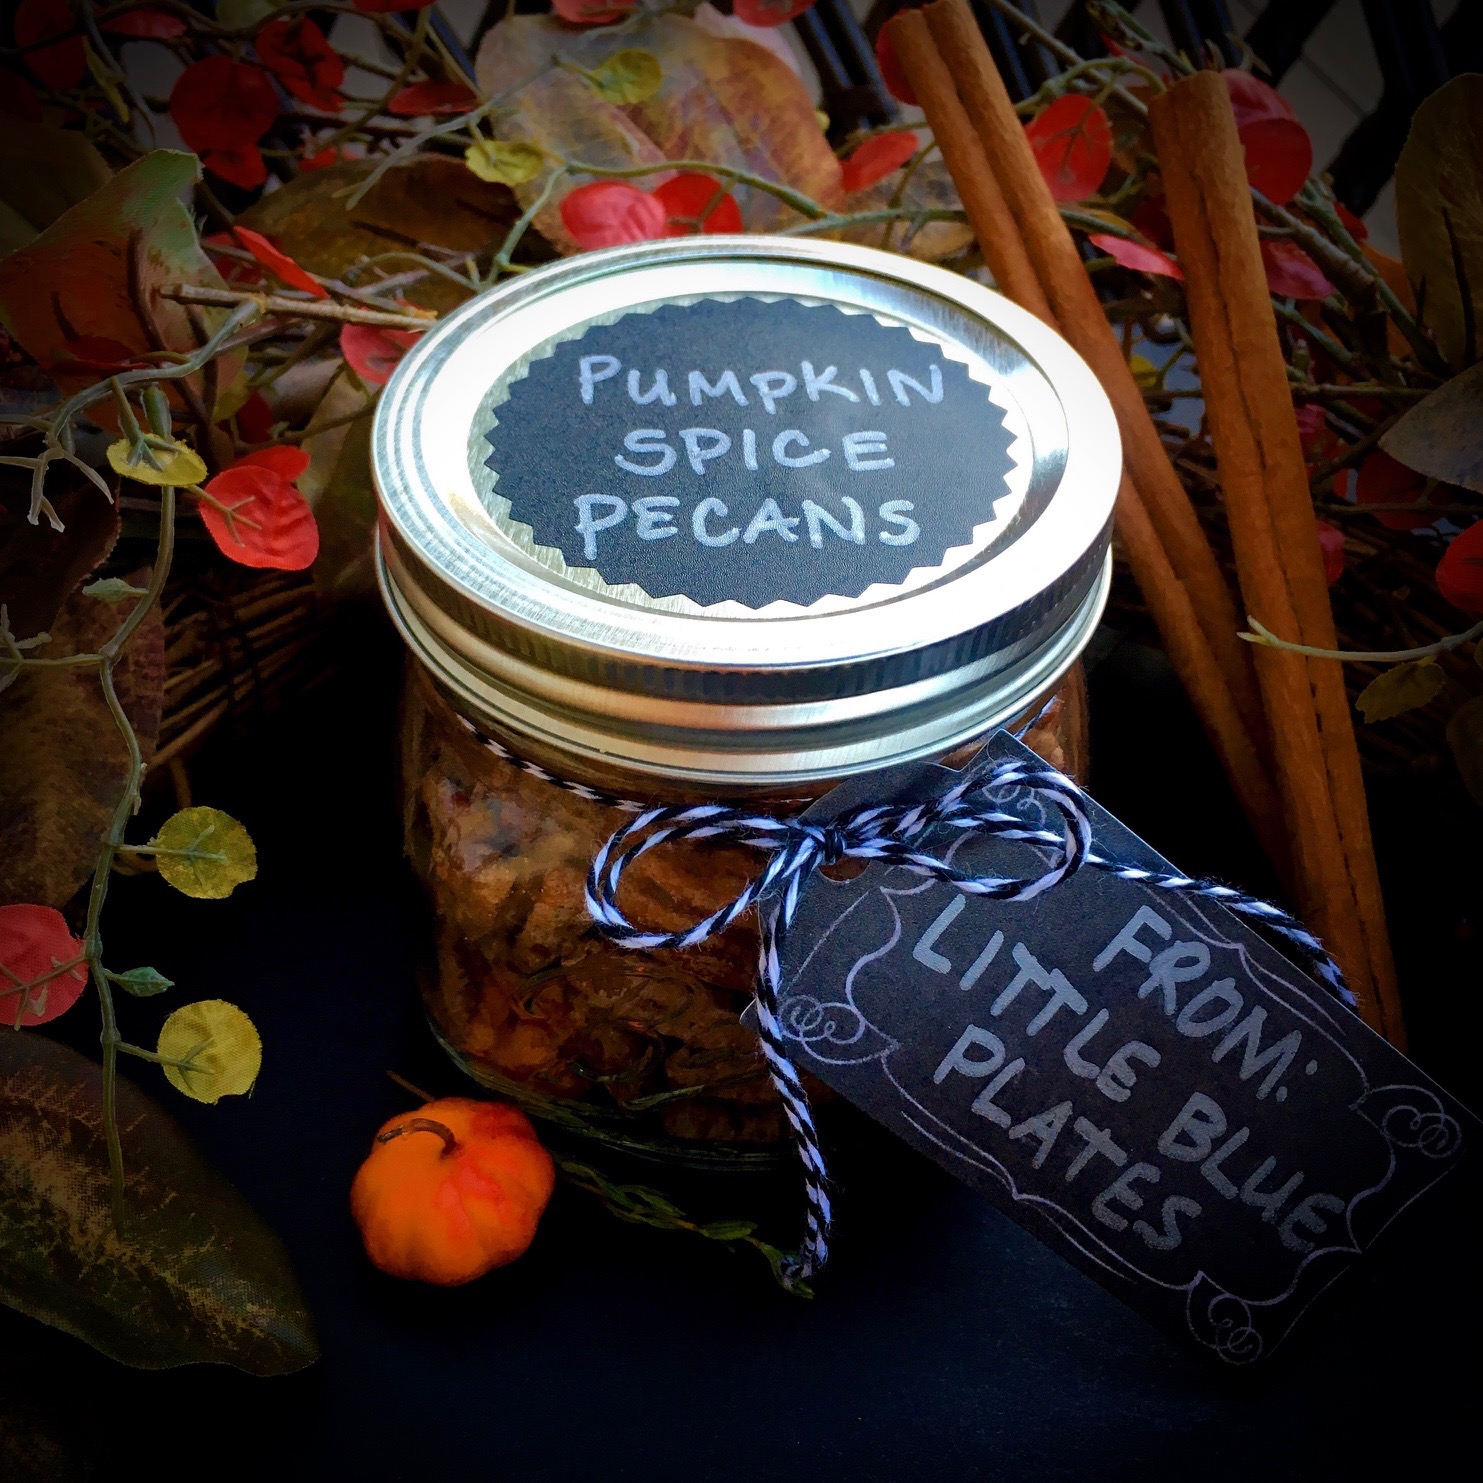 Pumpkin Spice Pecans! Perfect for Fall gift giving.